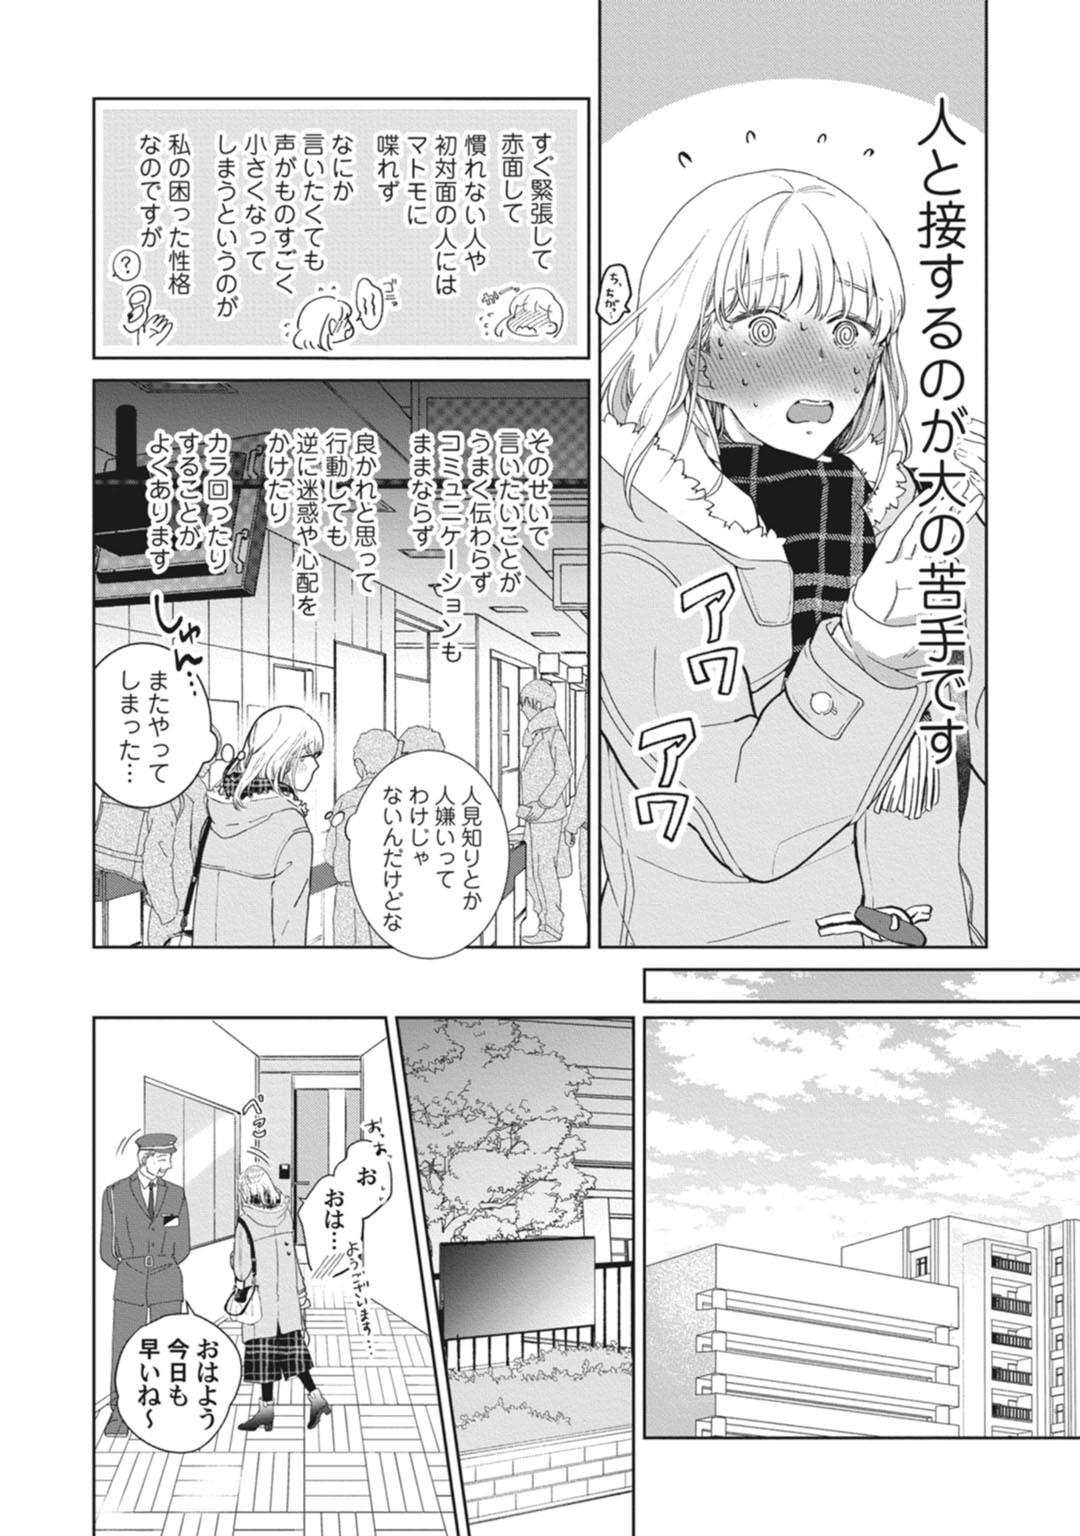 Hotwife [いせざき] whisper&mellow -ウィスパーアンドメロウ- Episode.1《Pinkcherie》 Self - Page 4